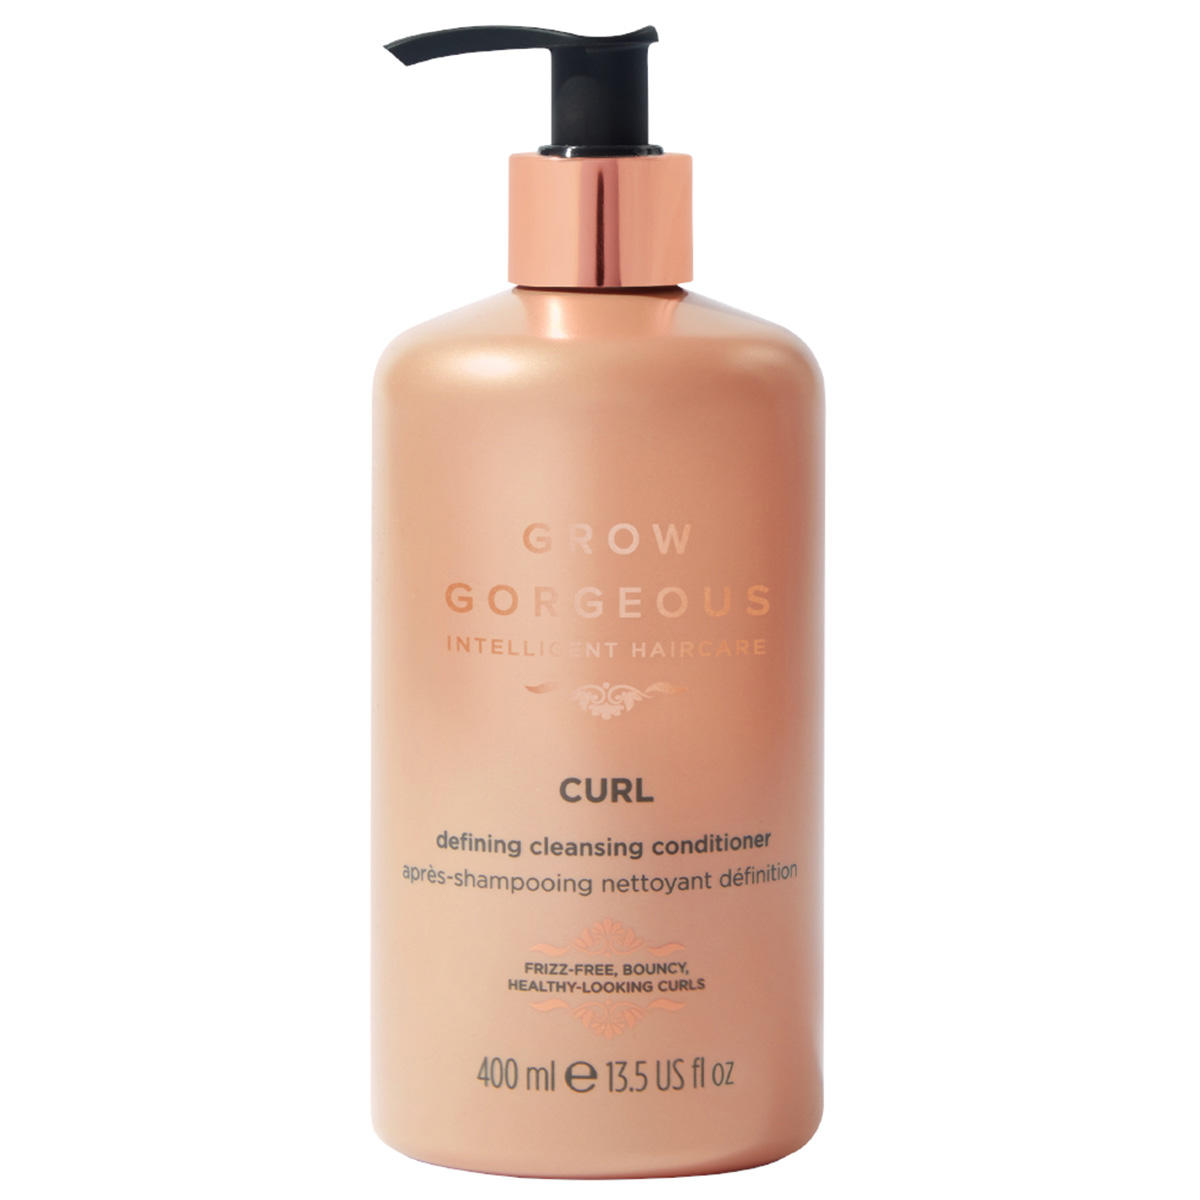 GROW GORGEOUS Curl Cleansing Conditioner 400 ml - 1